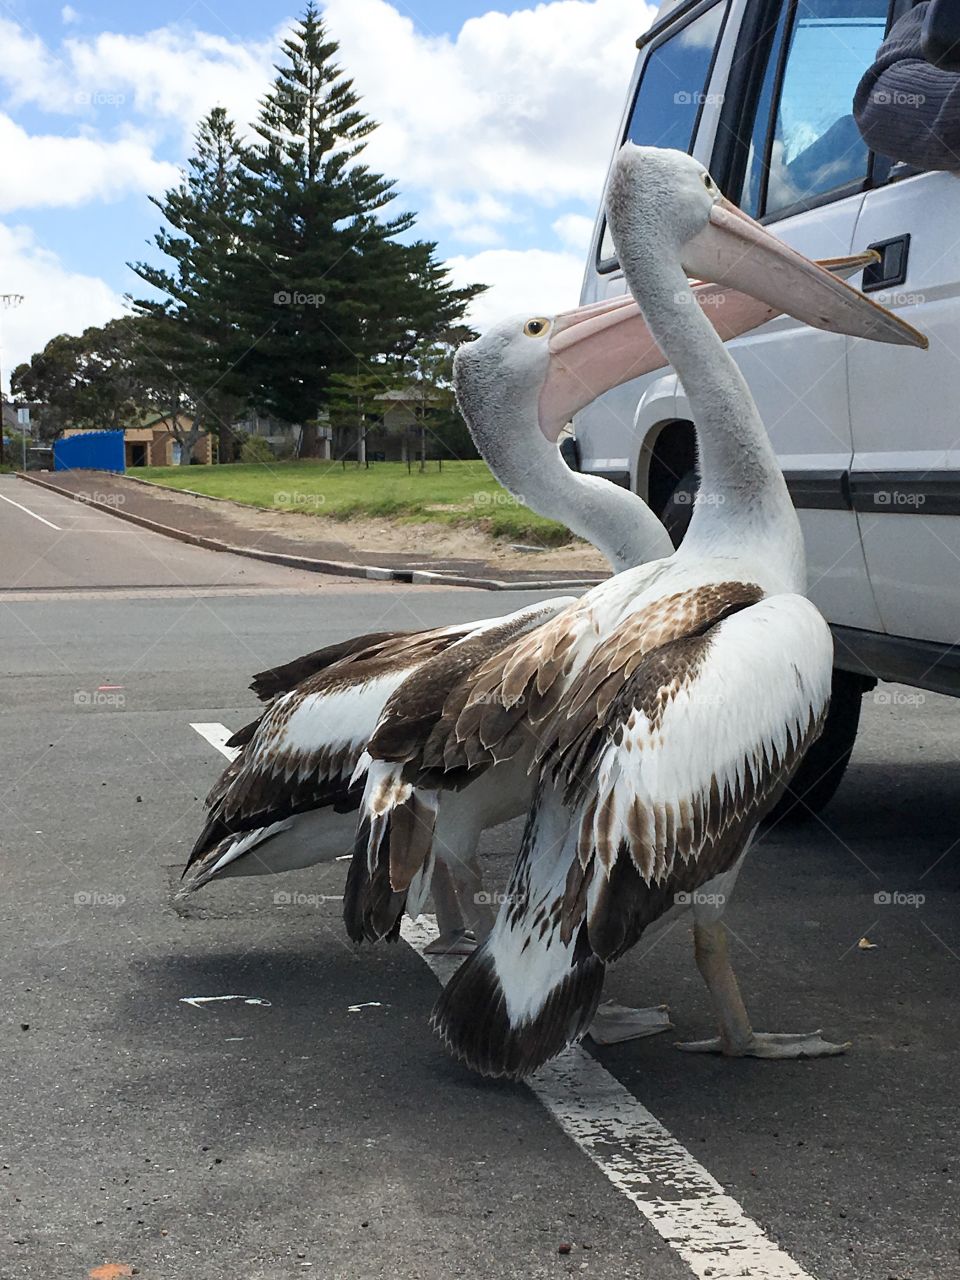 Giant Australian seagulls, just kidding, two large Pelicans begging for food handouts from people in parked vehicle at beach 